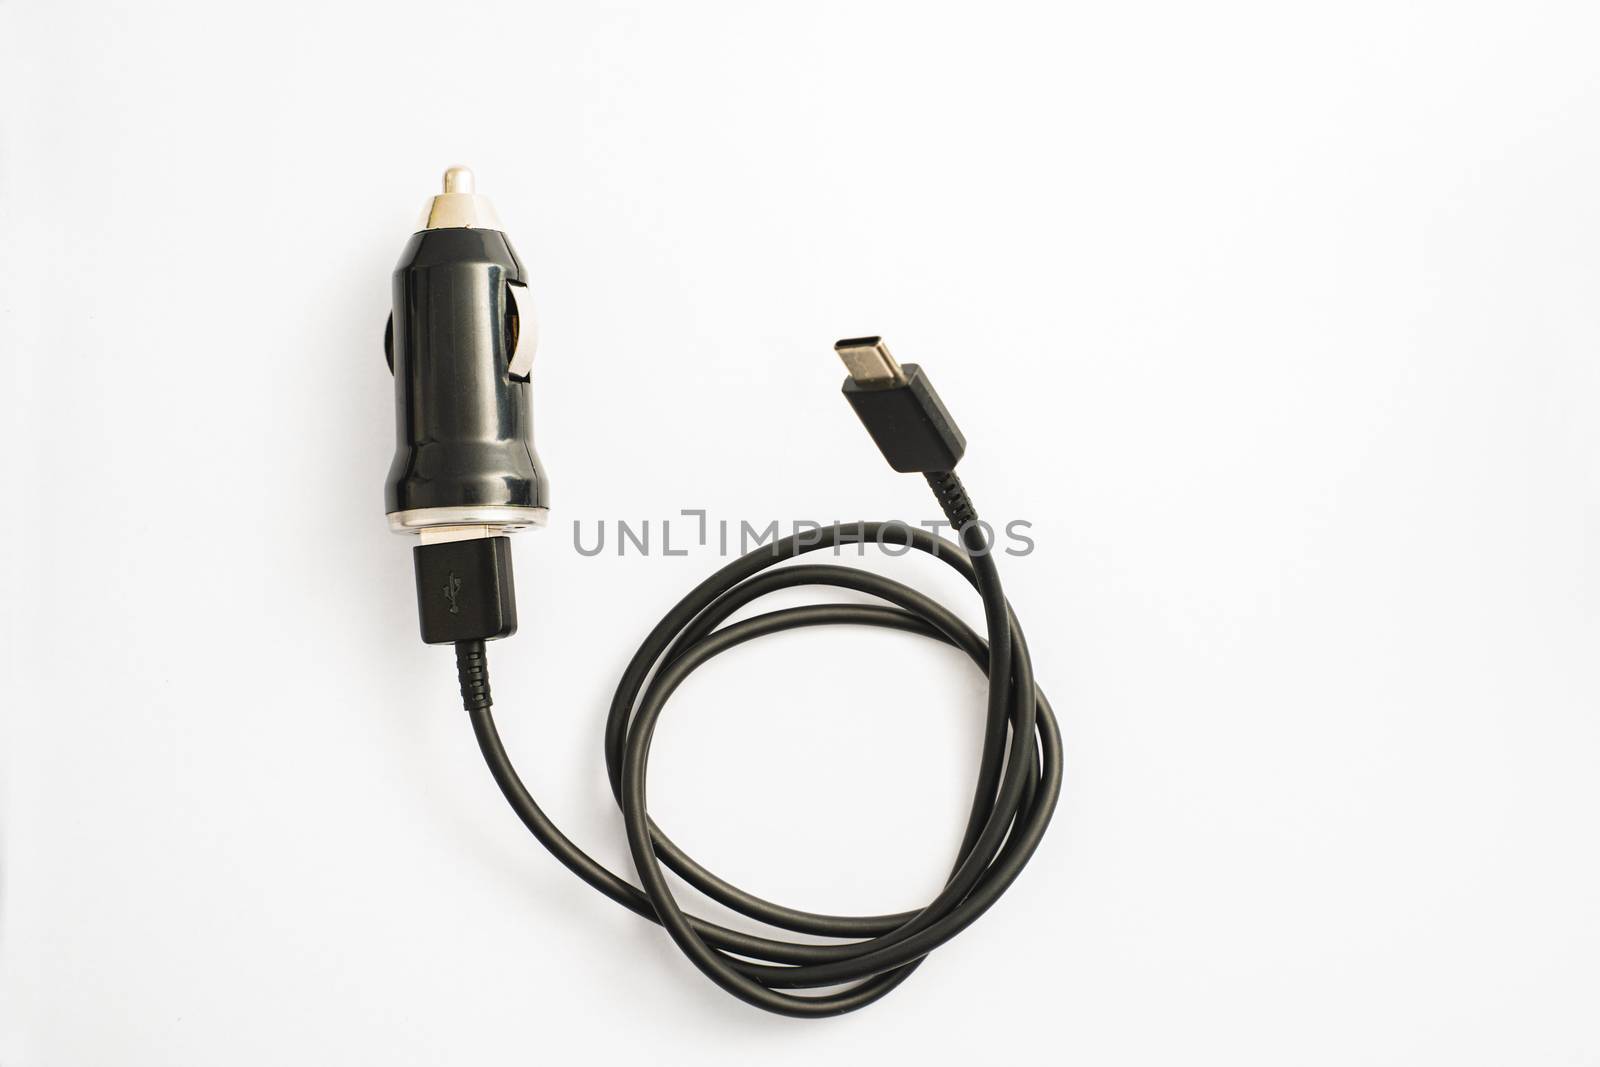 The black car charger with USB output connection cable. A photo taken on a black car charger with USB output connection cable against a white backdrop